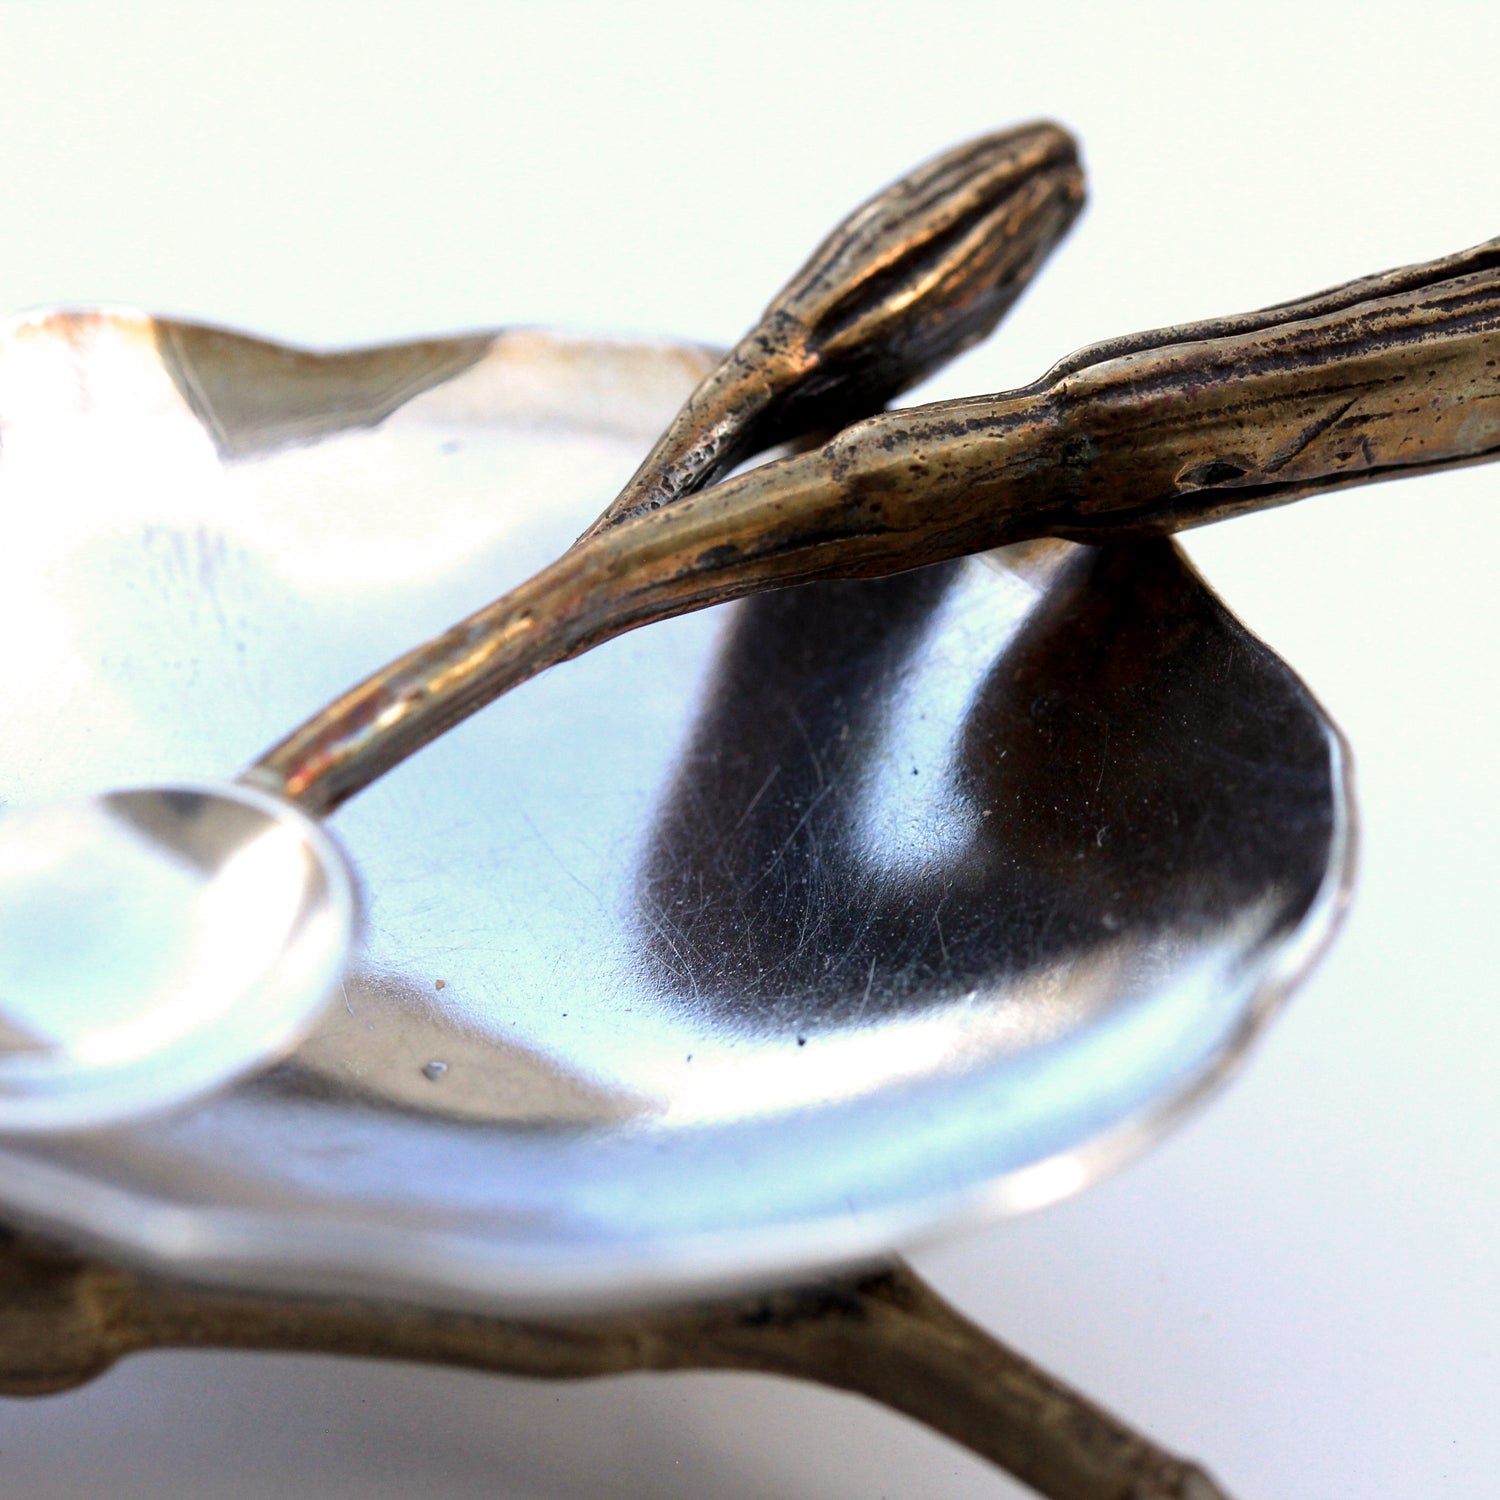 Handmade Salt Cellar or tiny serving dish in Sterling Silver and cast lily bud harvested in Greenville SC, detail of dish and spoon